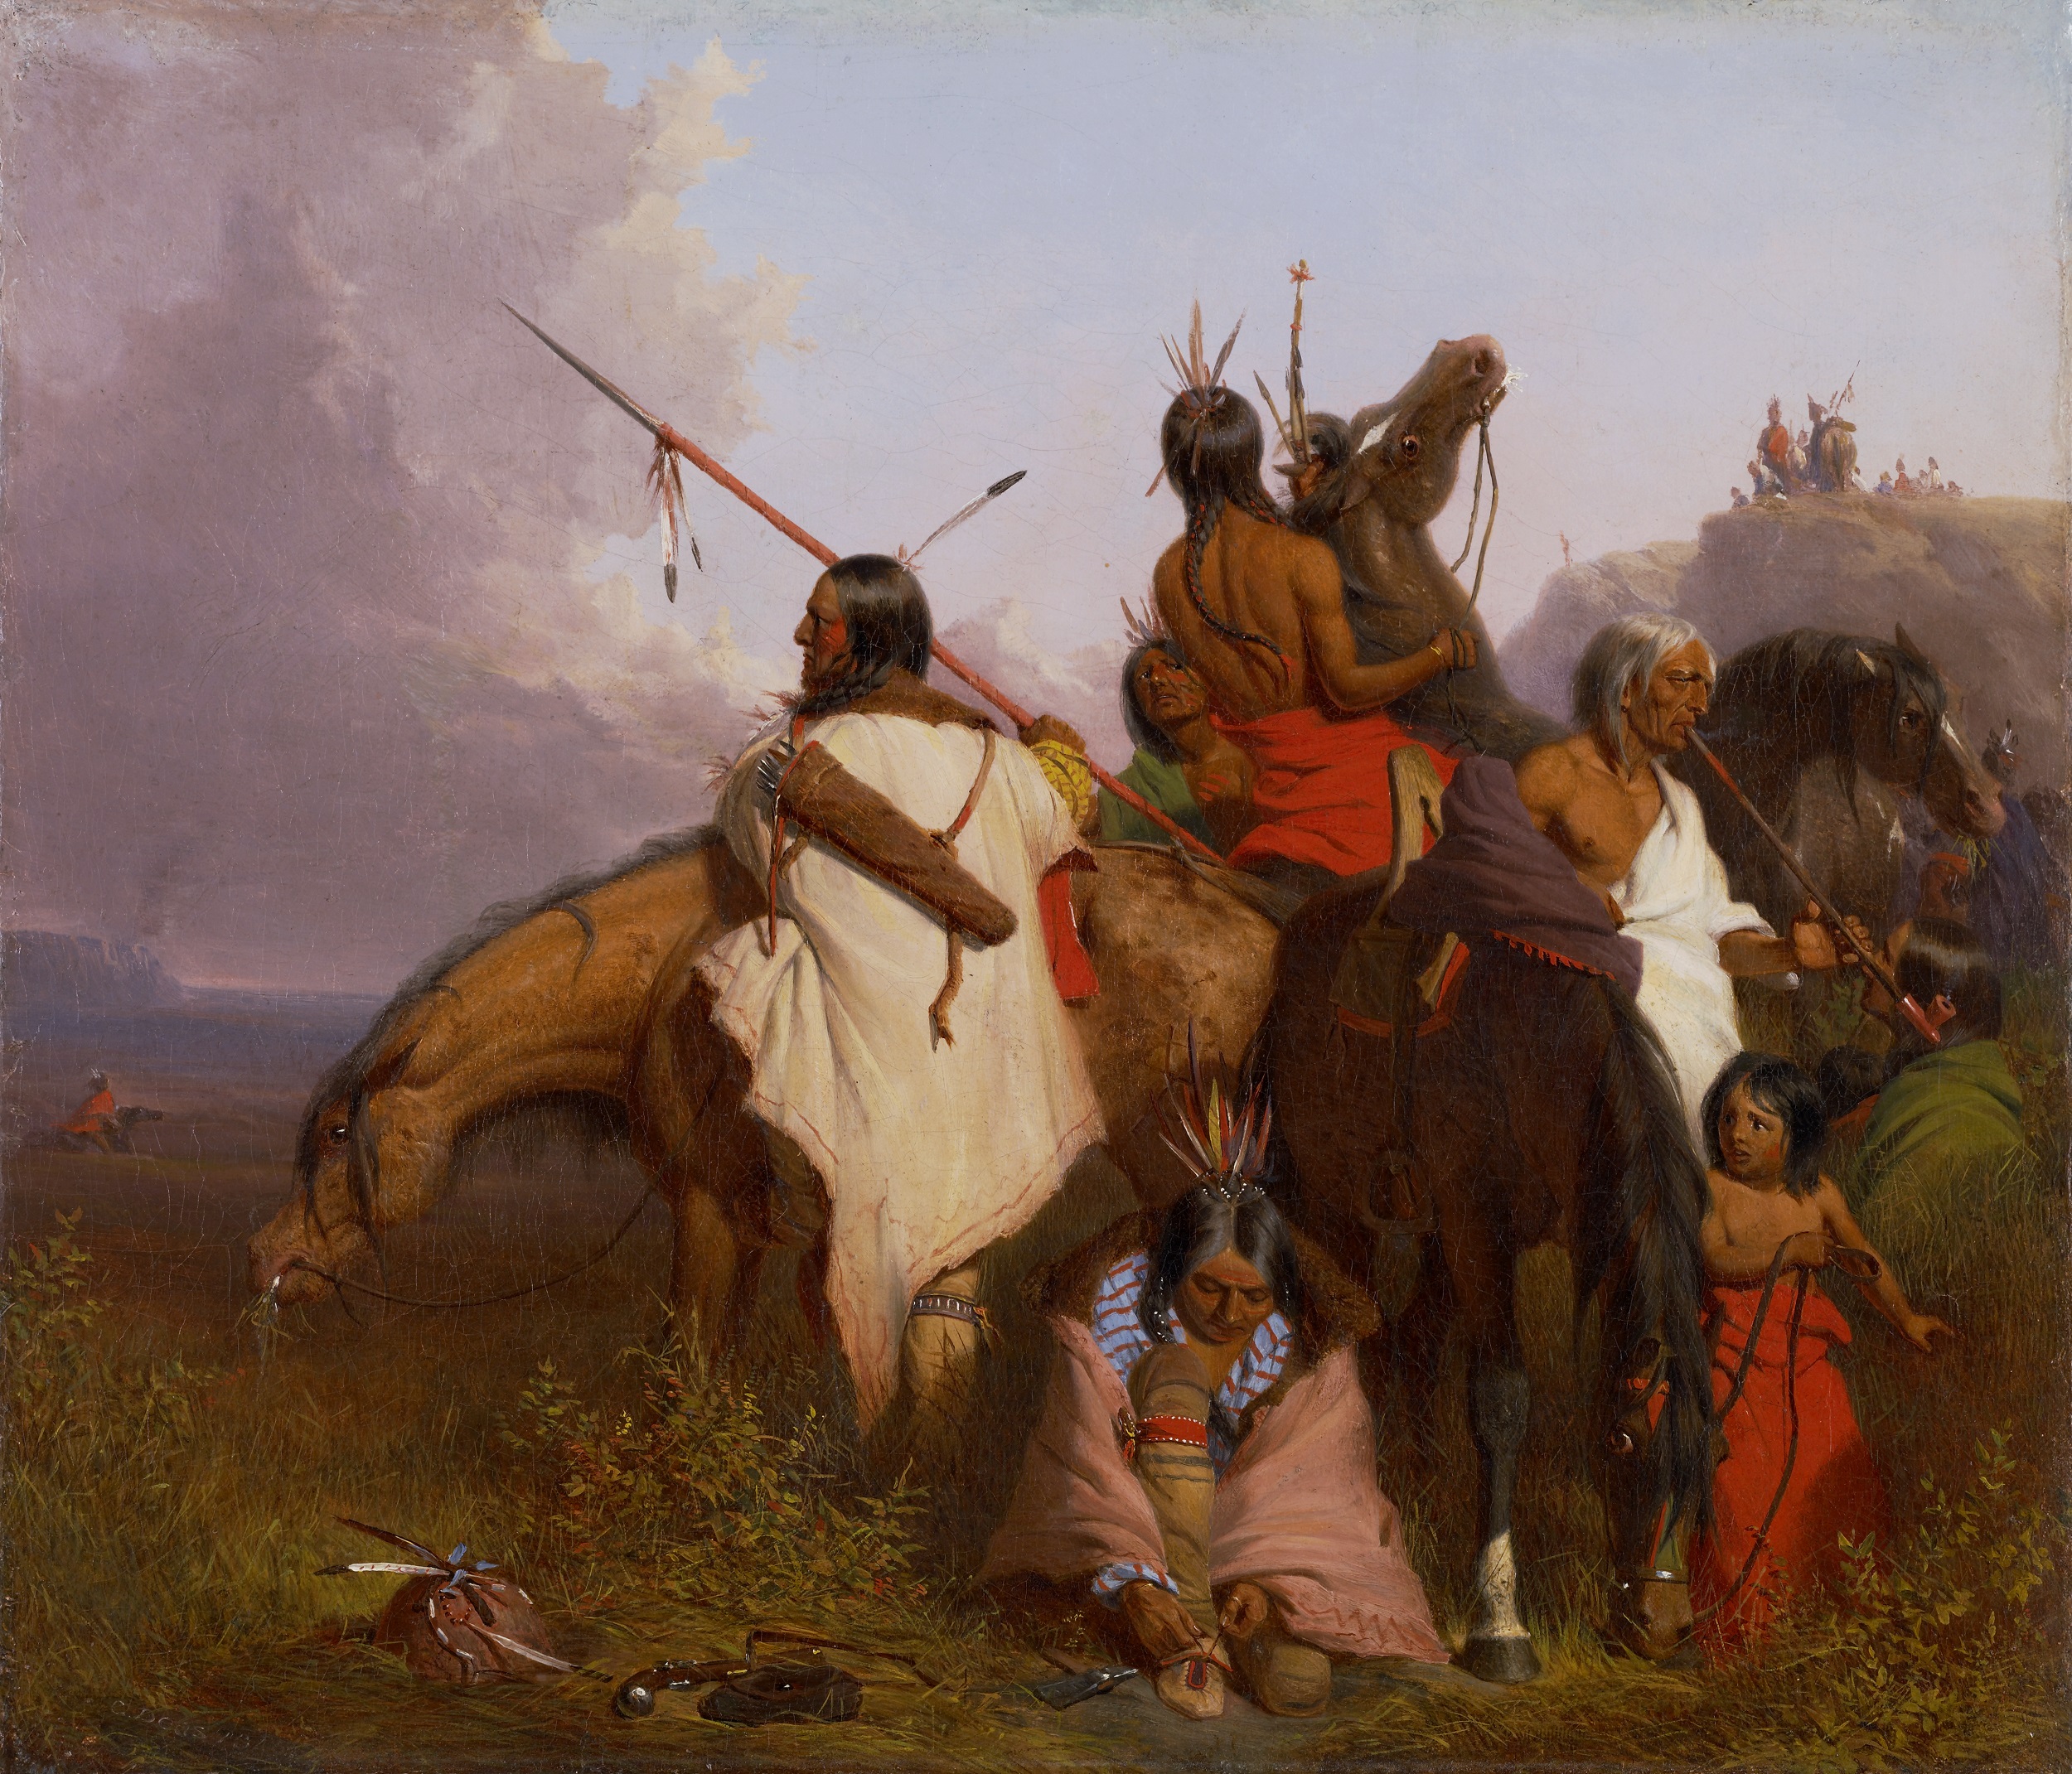 Oil painting of a family of Native Americans stopping in the middle of a journey